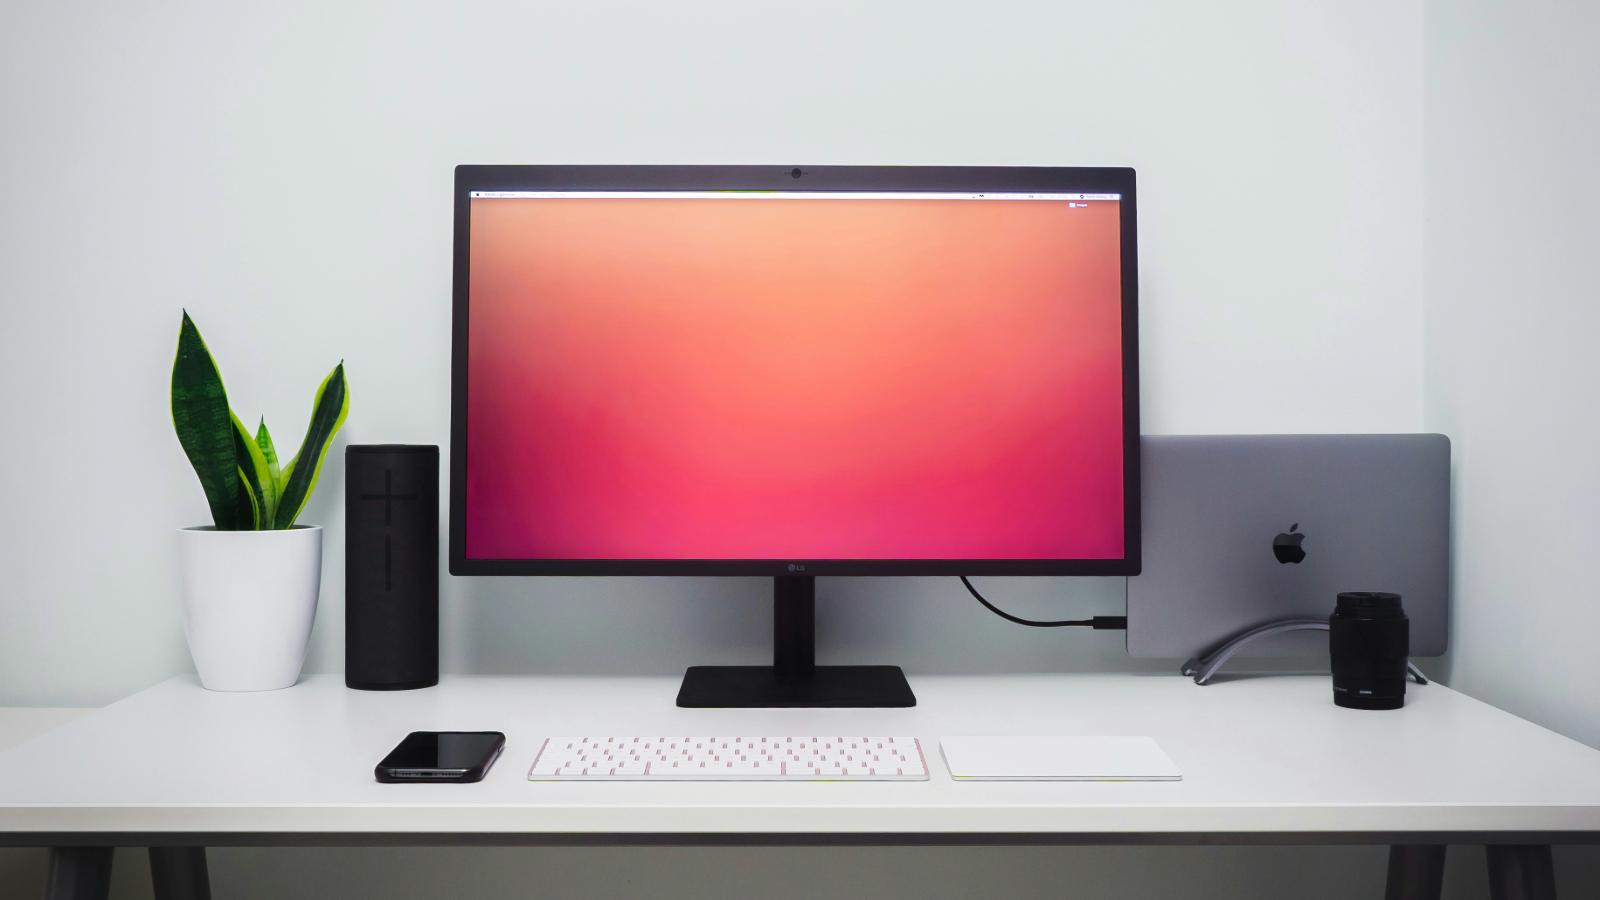 A monitor on a table with Apple Mac next to it